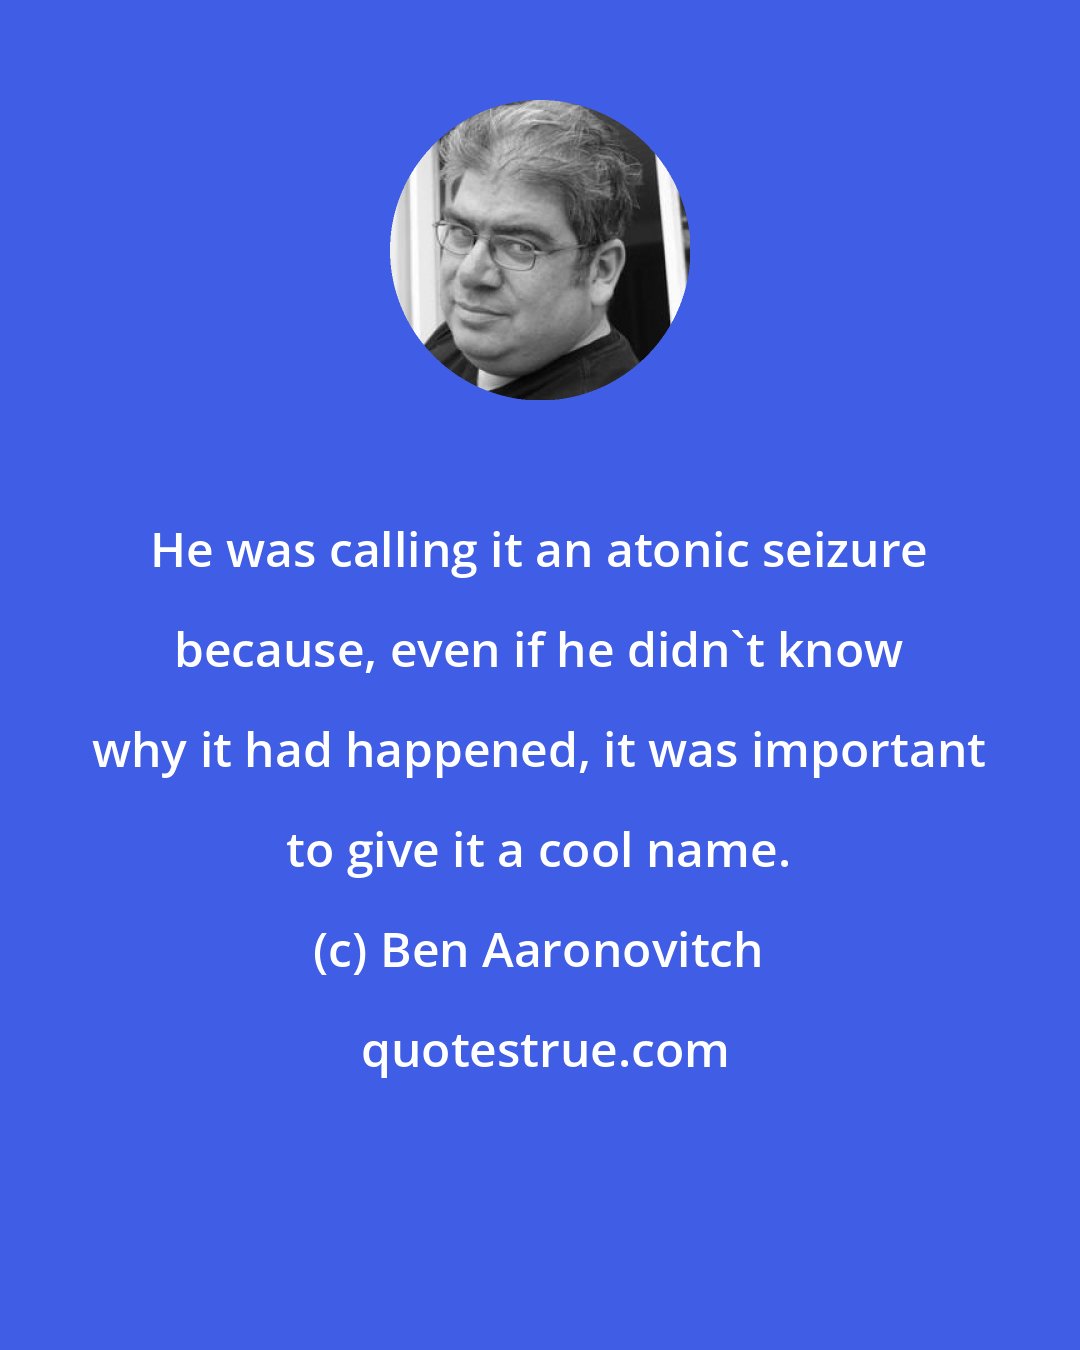 Ben Aaronovitch: He was calling it an atonic seizure because, even if he didn't know why it had happened, it was important to give it a cool name.